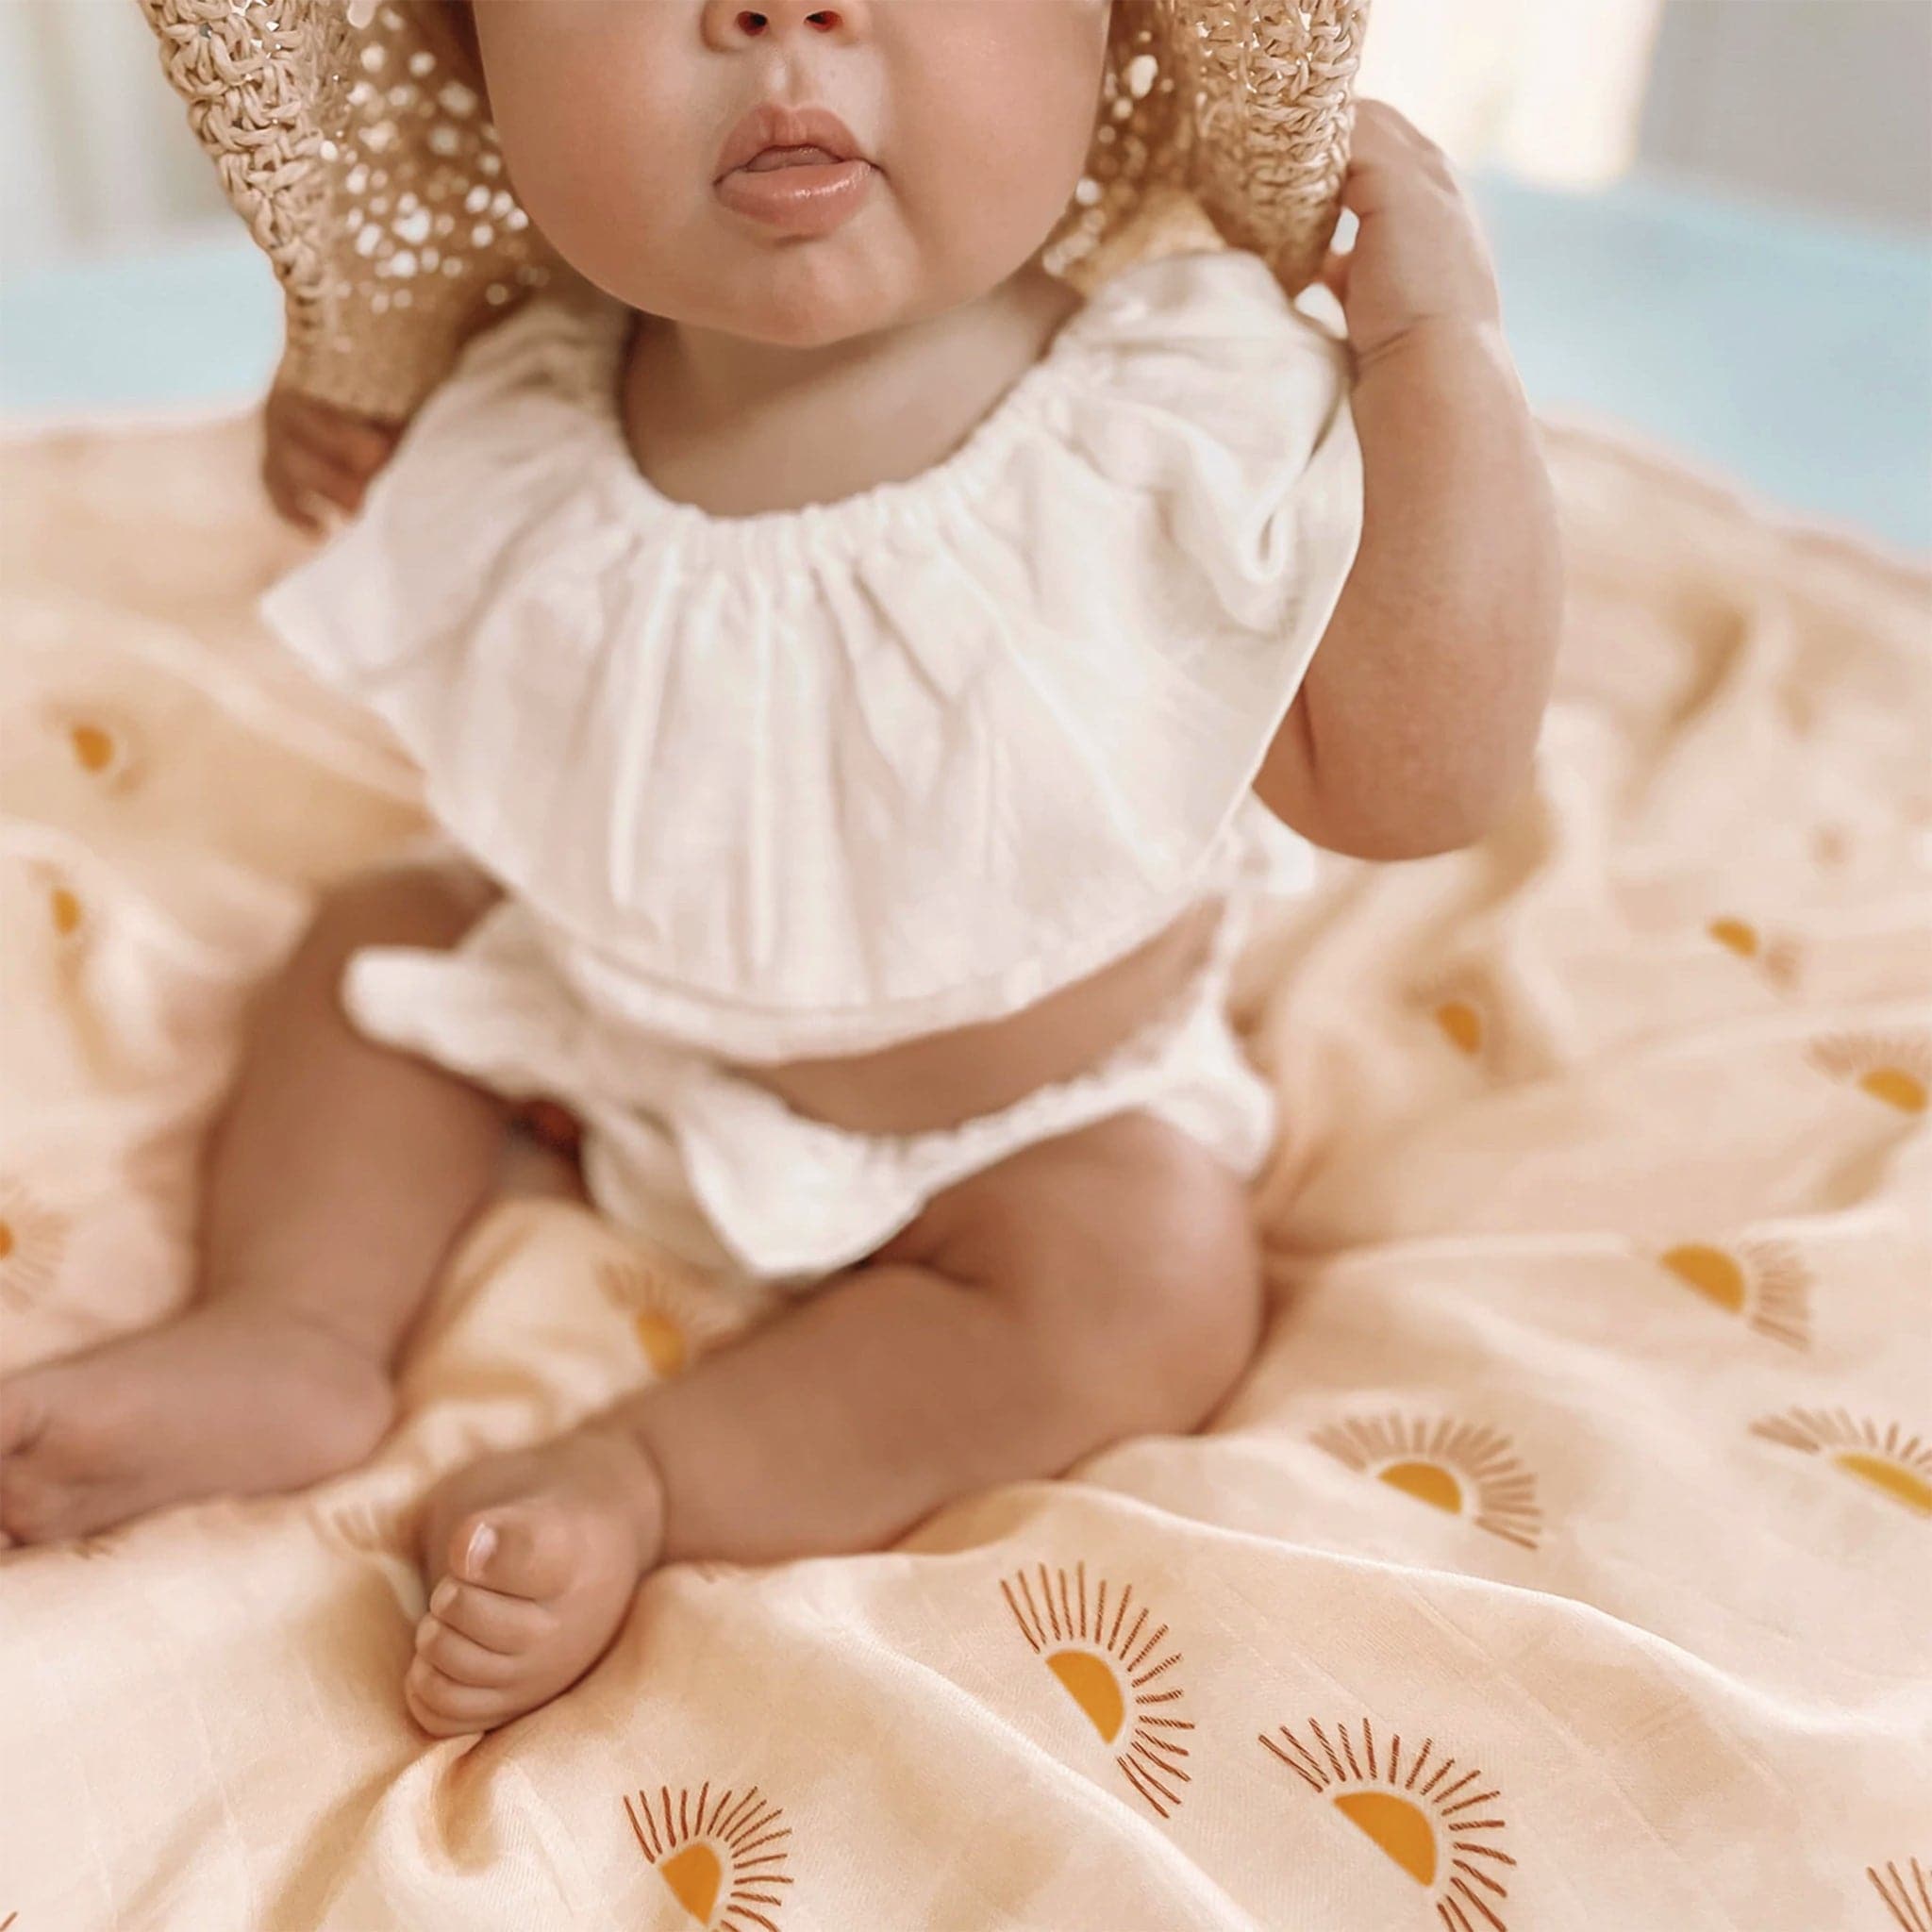 Pale beige swaddle with bohemian half sun pattern positioned as a changing cloth below a small baby. The baby is wearing a white ruffled set and woven sunhat. 